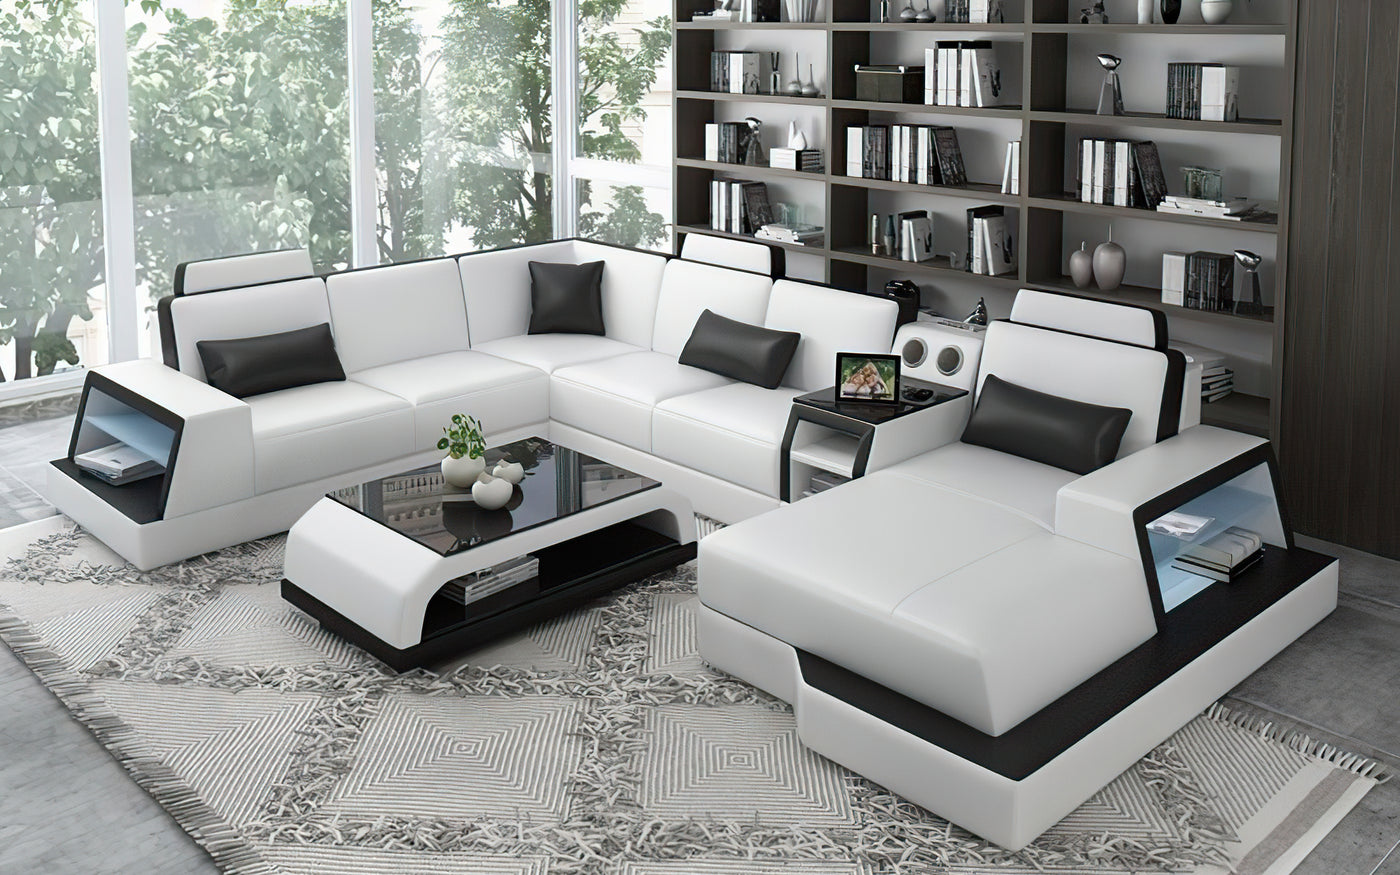 Civia Modern Leather Oversized Sectional with Storage | Futuristic ...